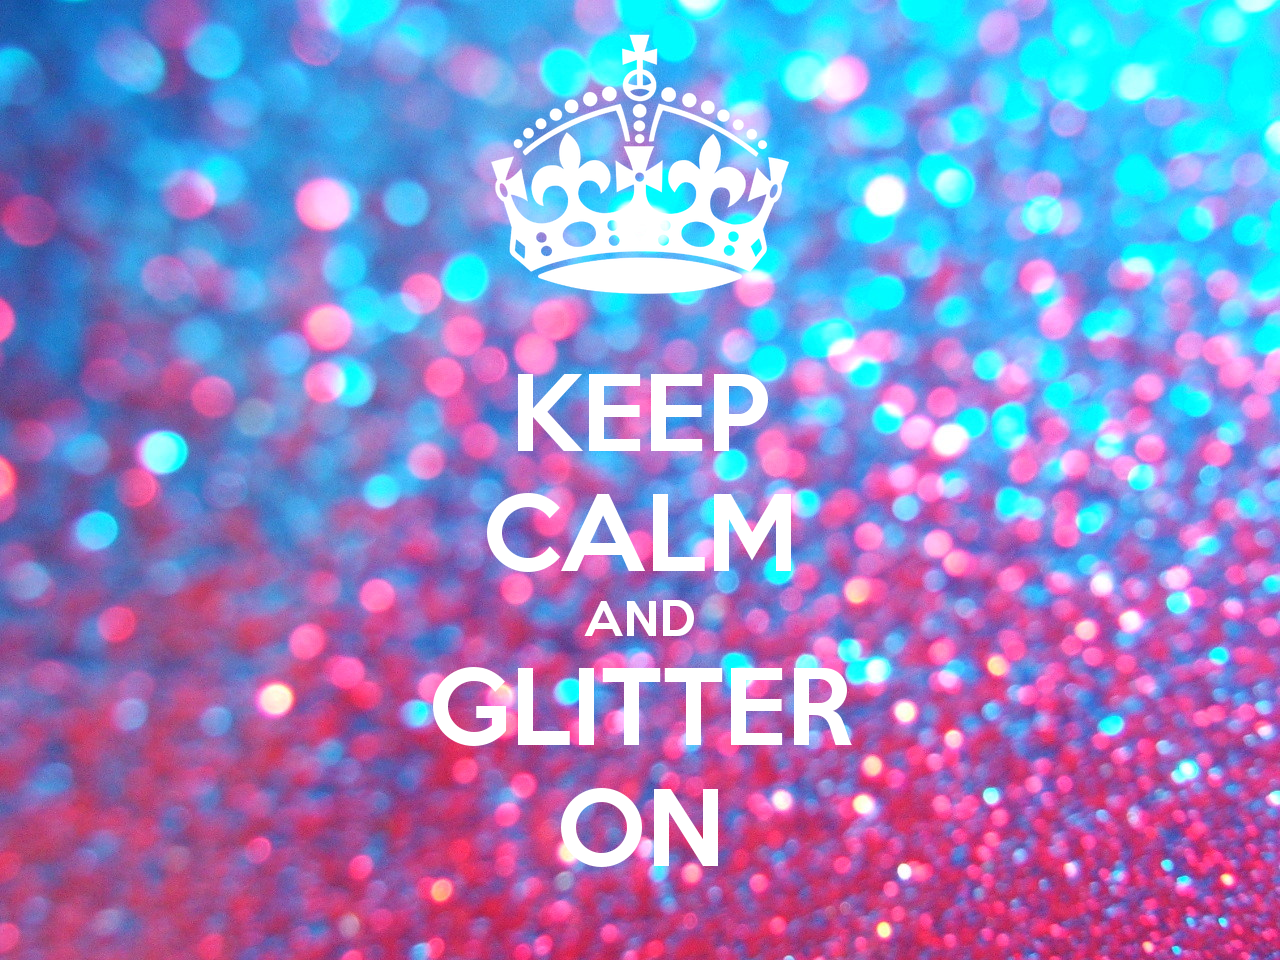 Keep Calm And Glitter On Carry Image Generator